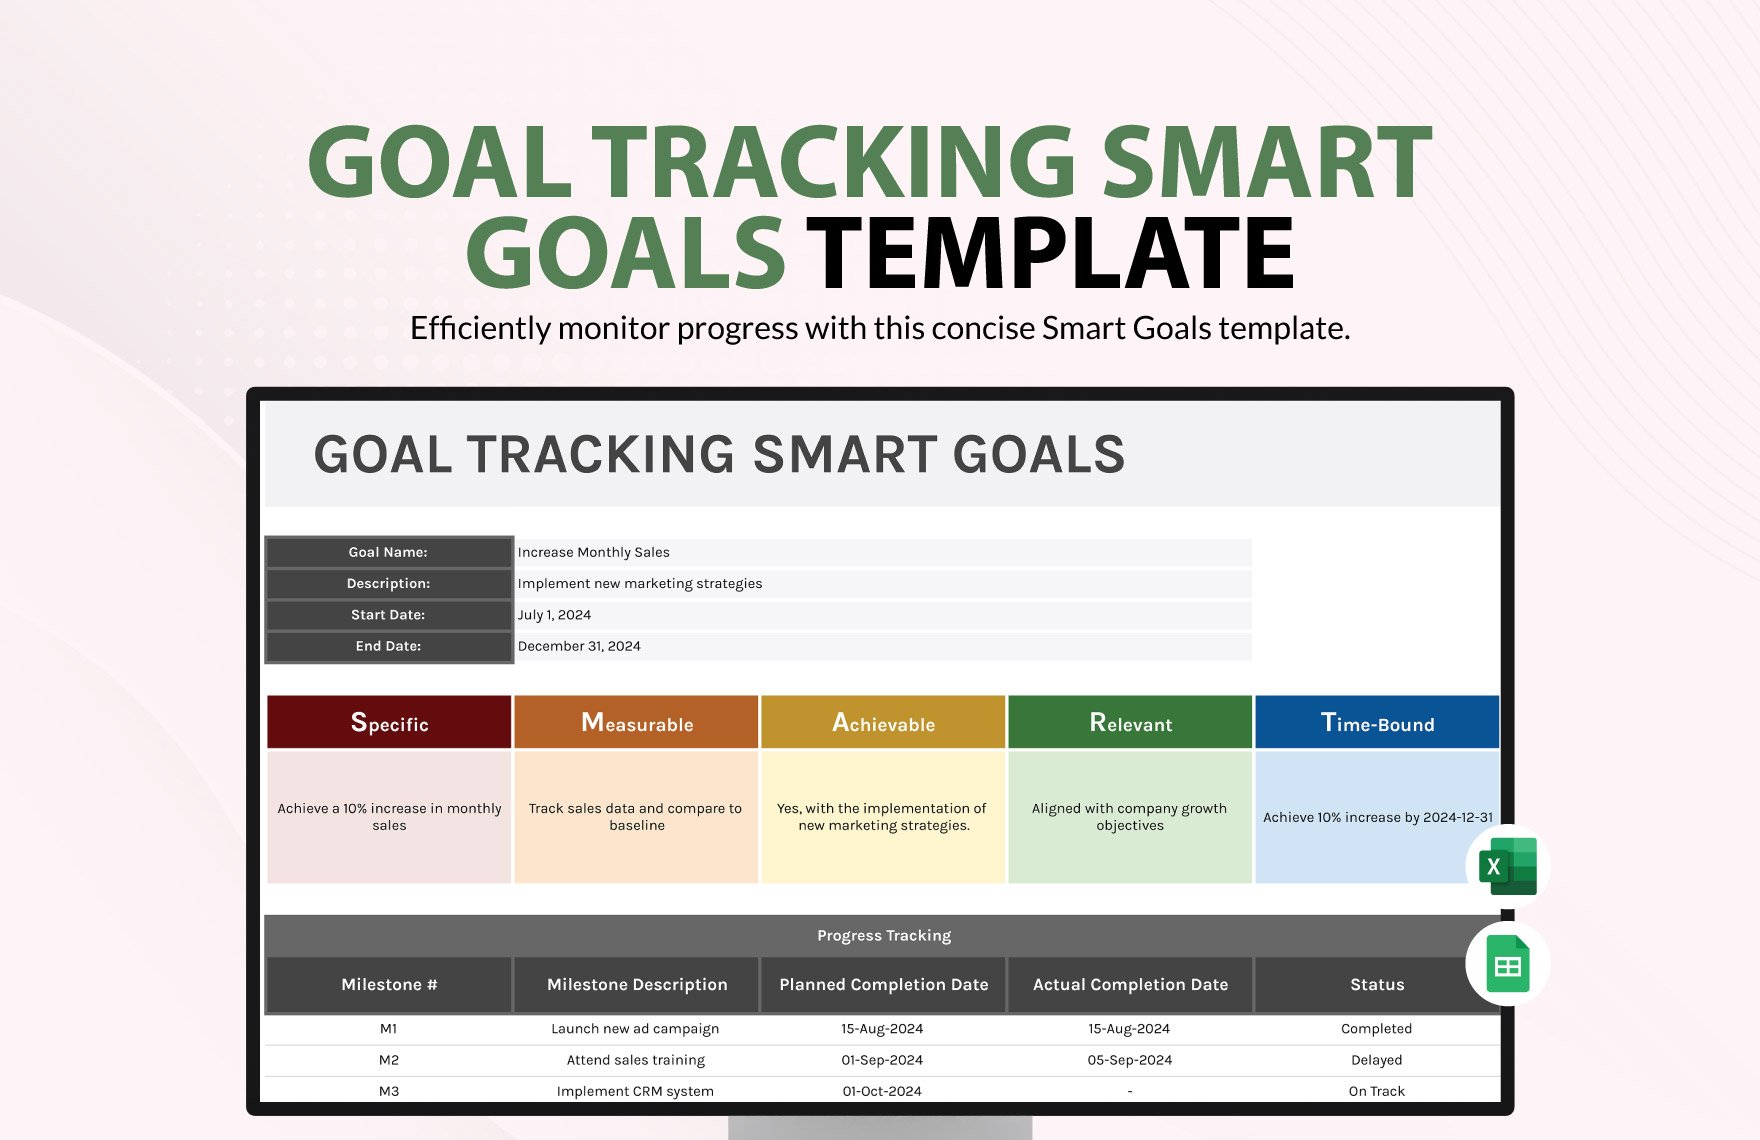 Goal Tracking Smart Goals Template in Excel, Google Sheets